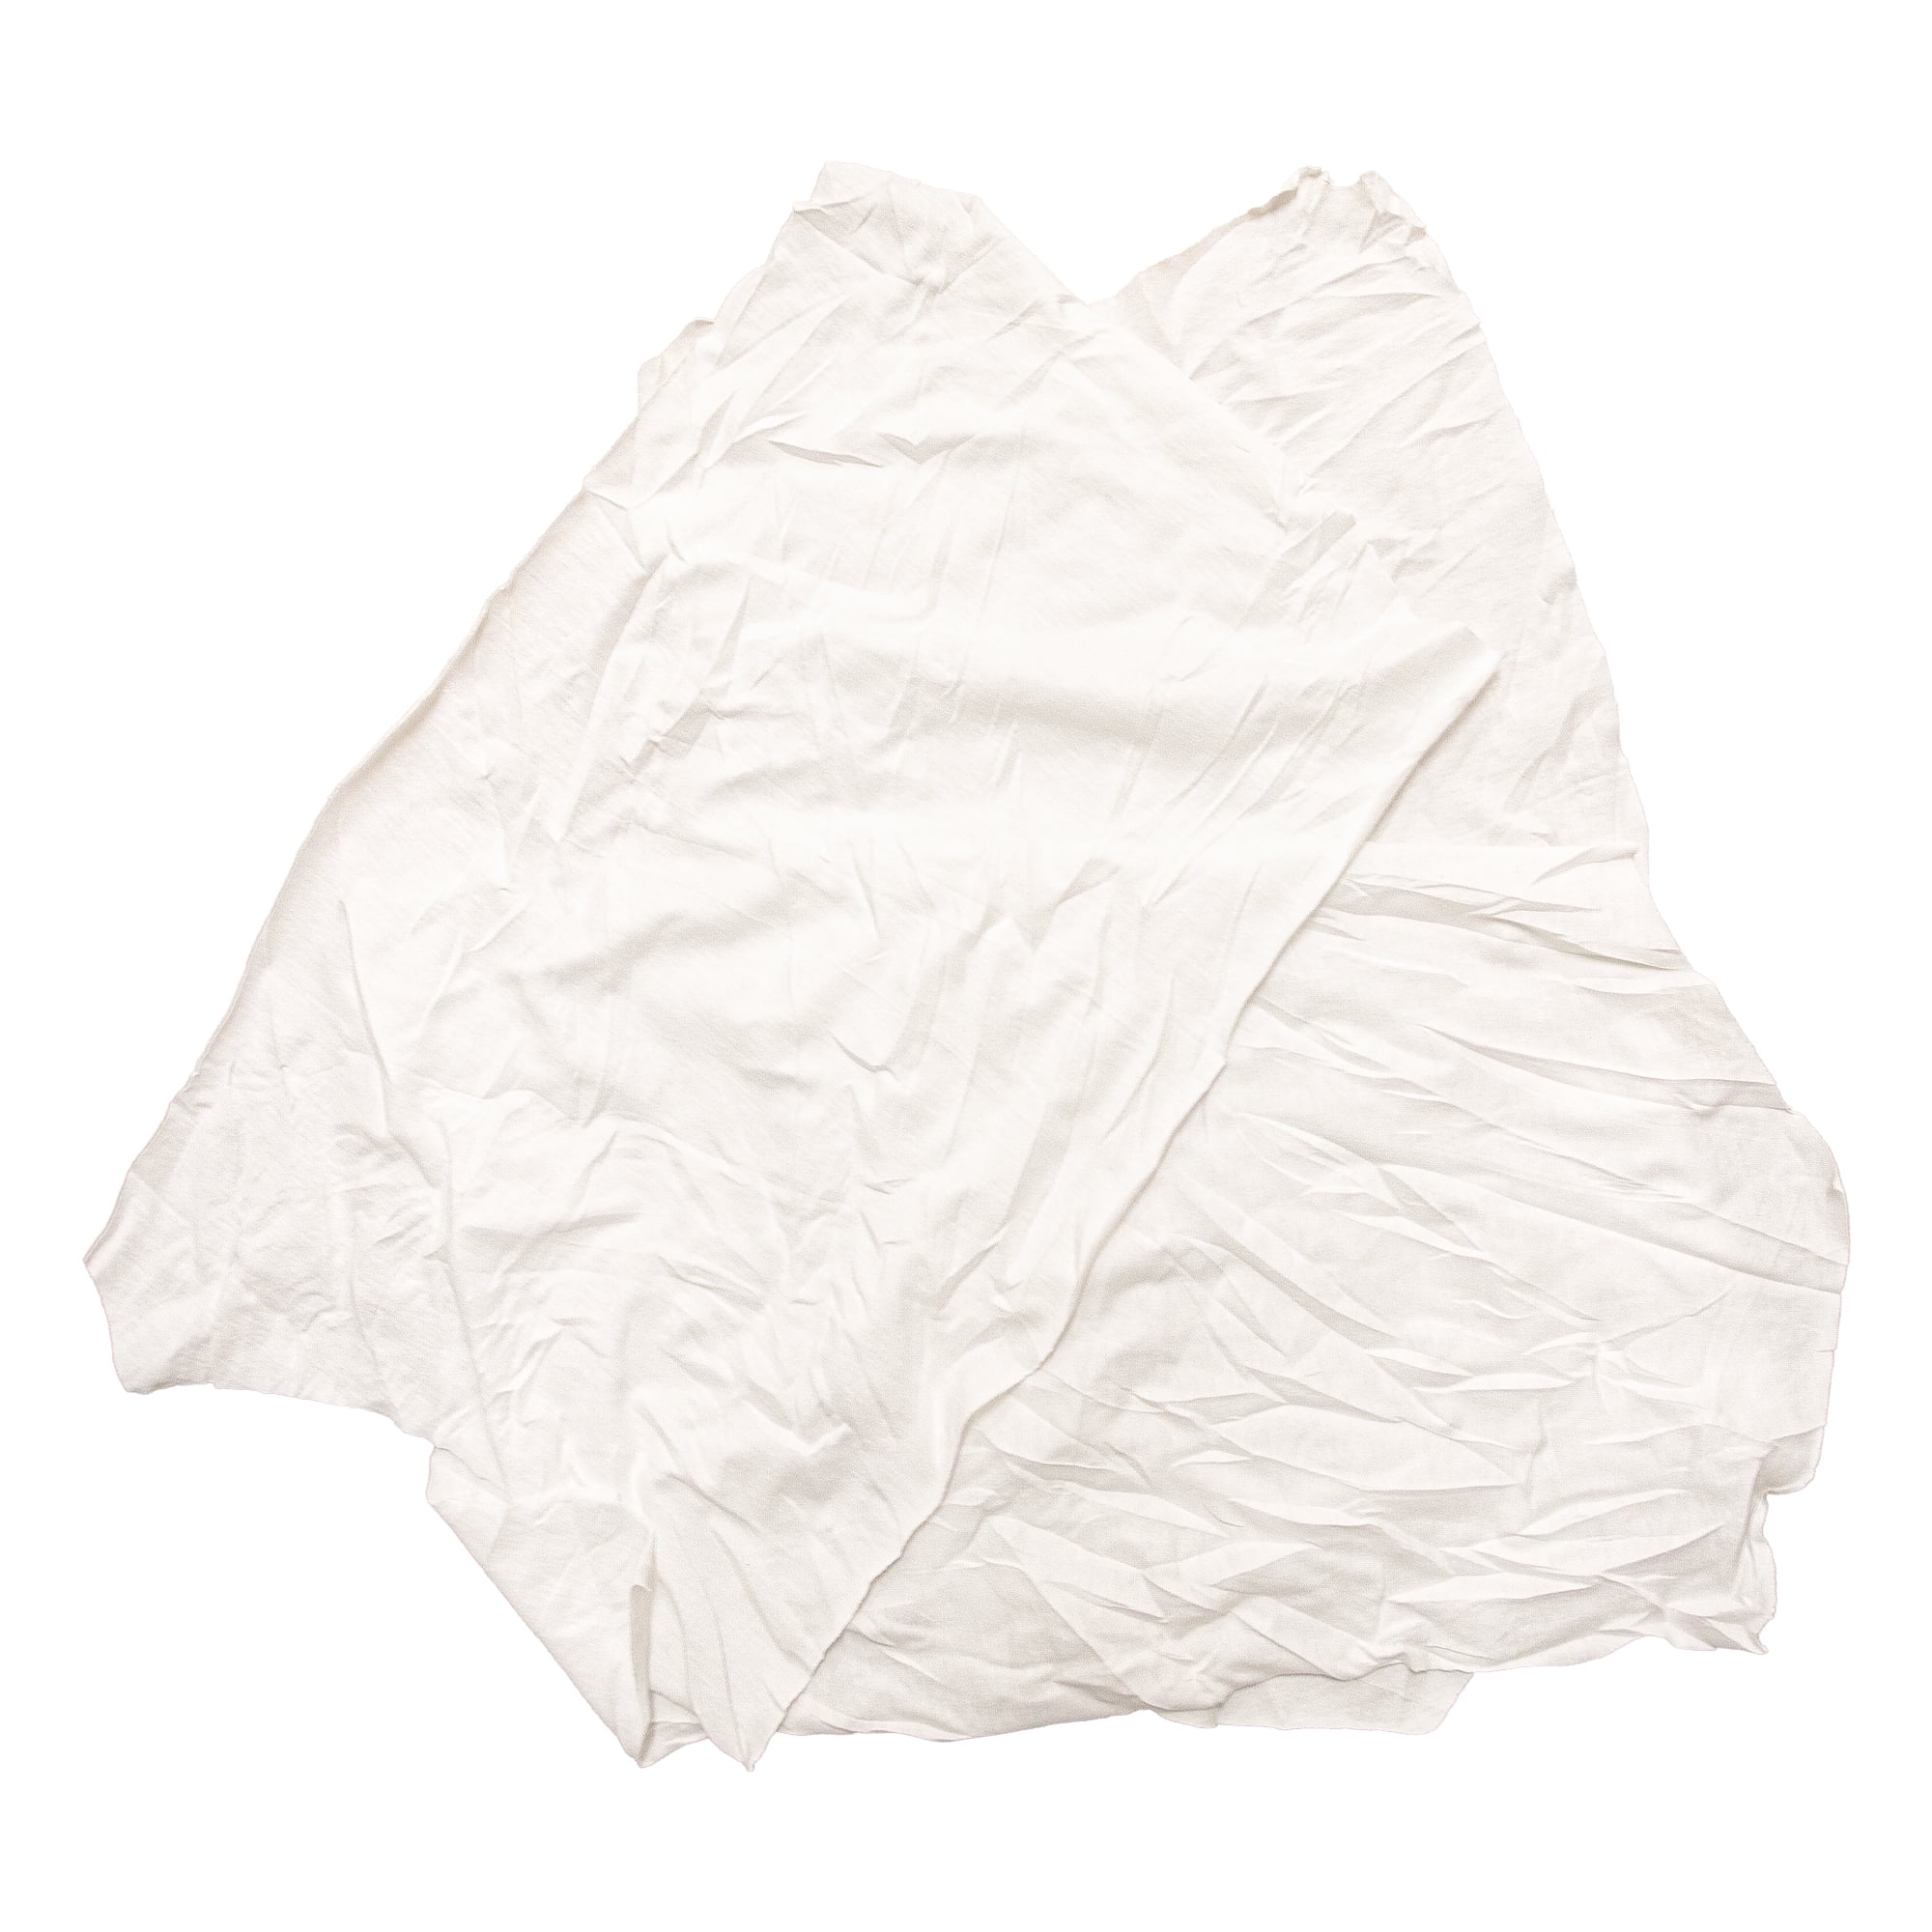 A&A Wiping Cloth New White Knit Rags, Smooth White Rags for Painting,  Staining, and Cleaning, 5 Pound Box